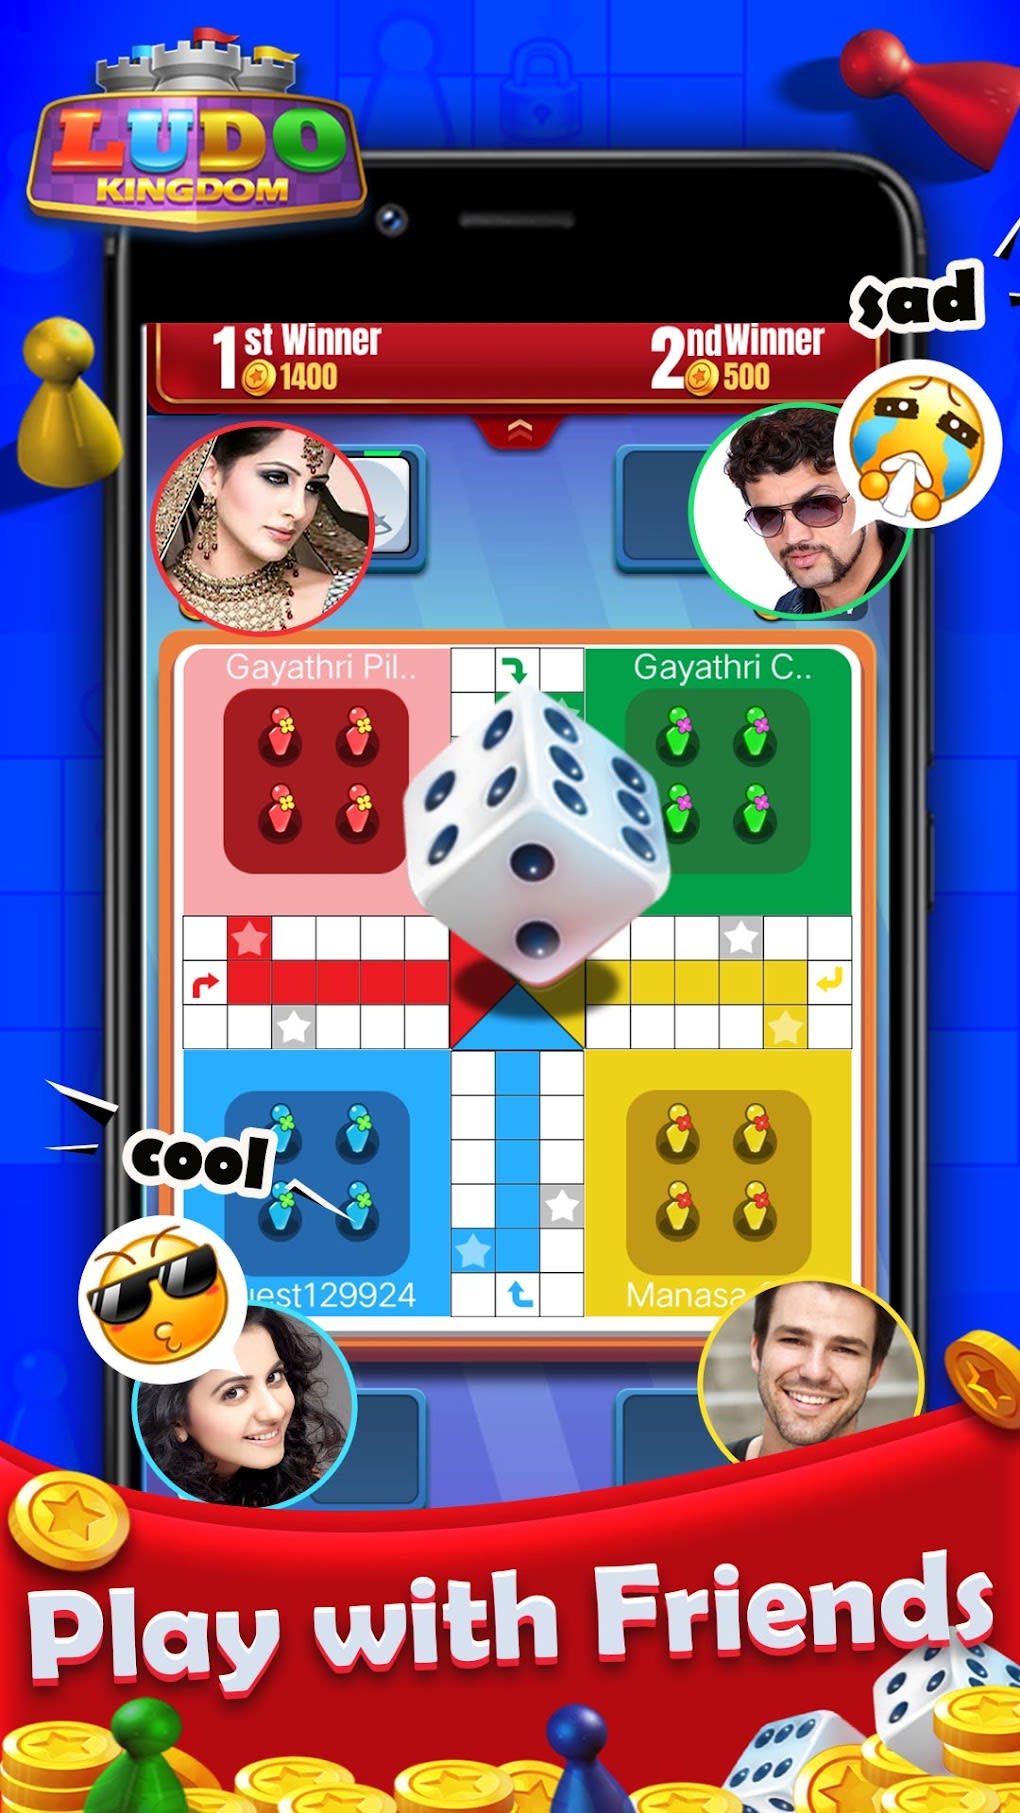 Cartoon Network Ludo APK for Android Download